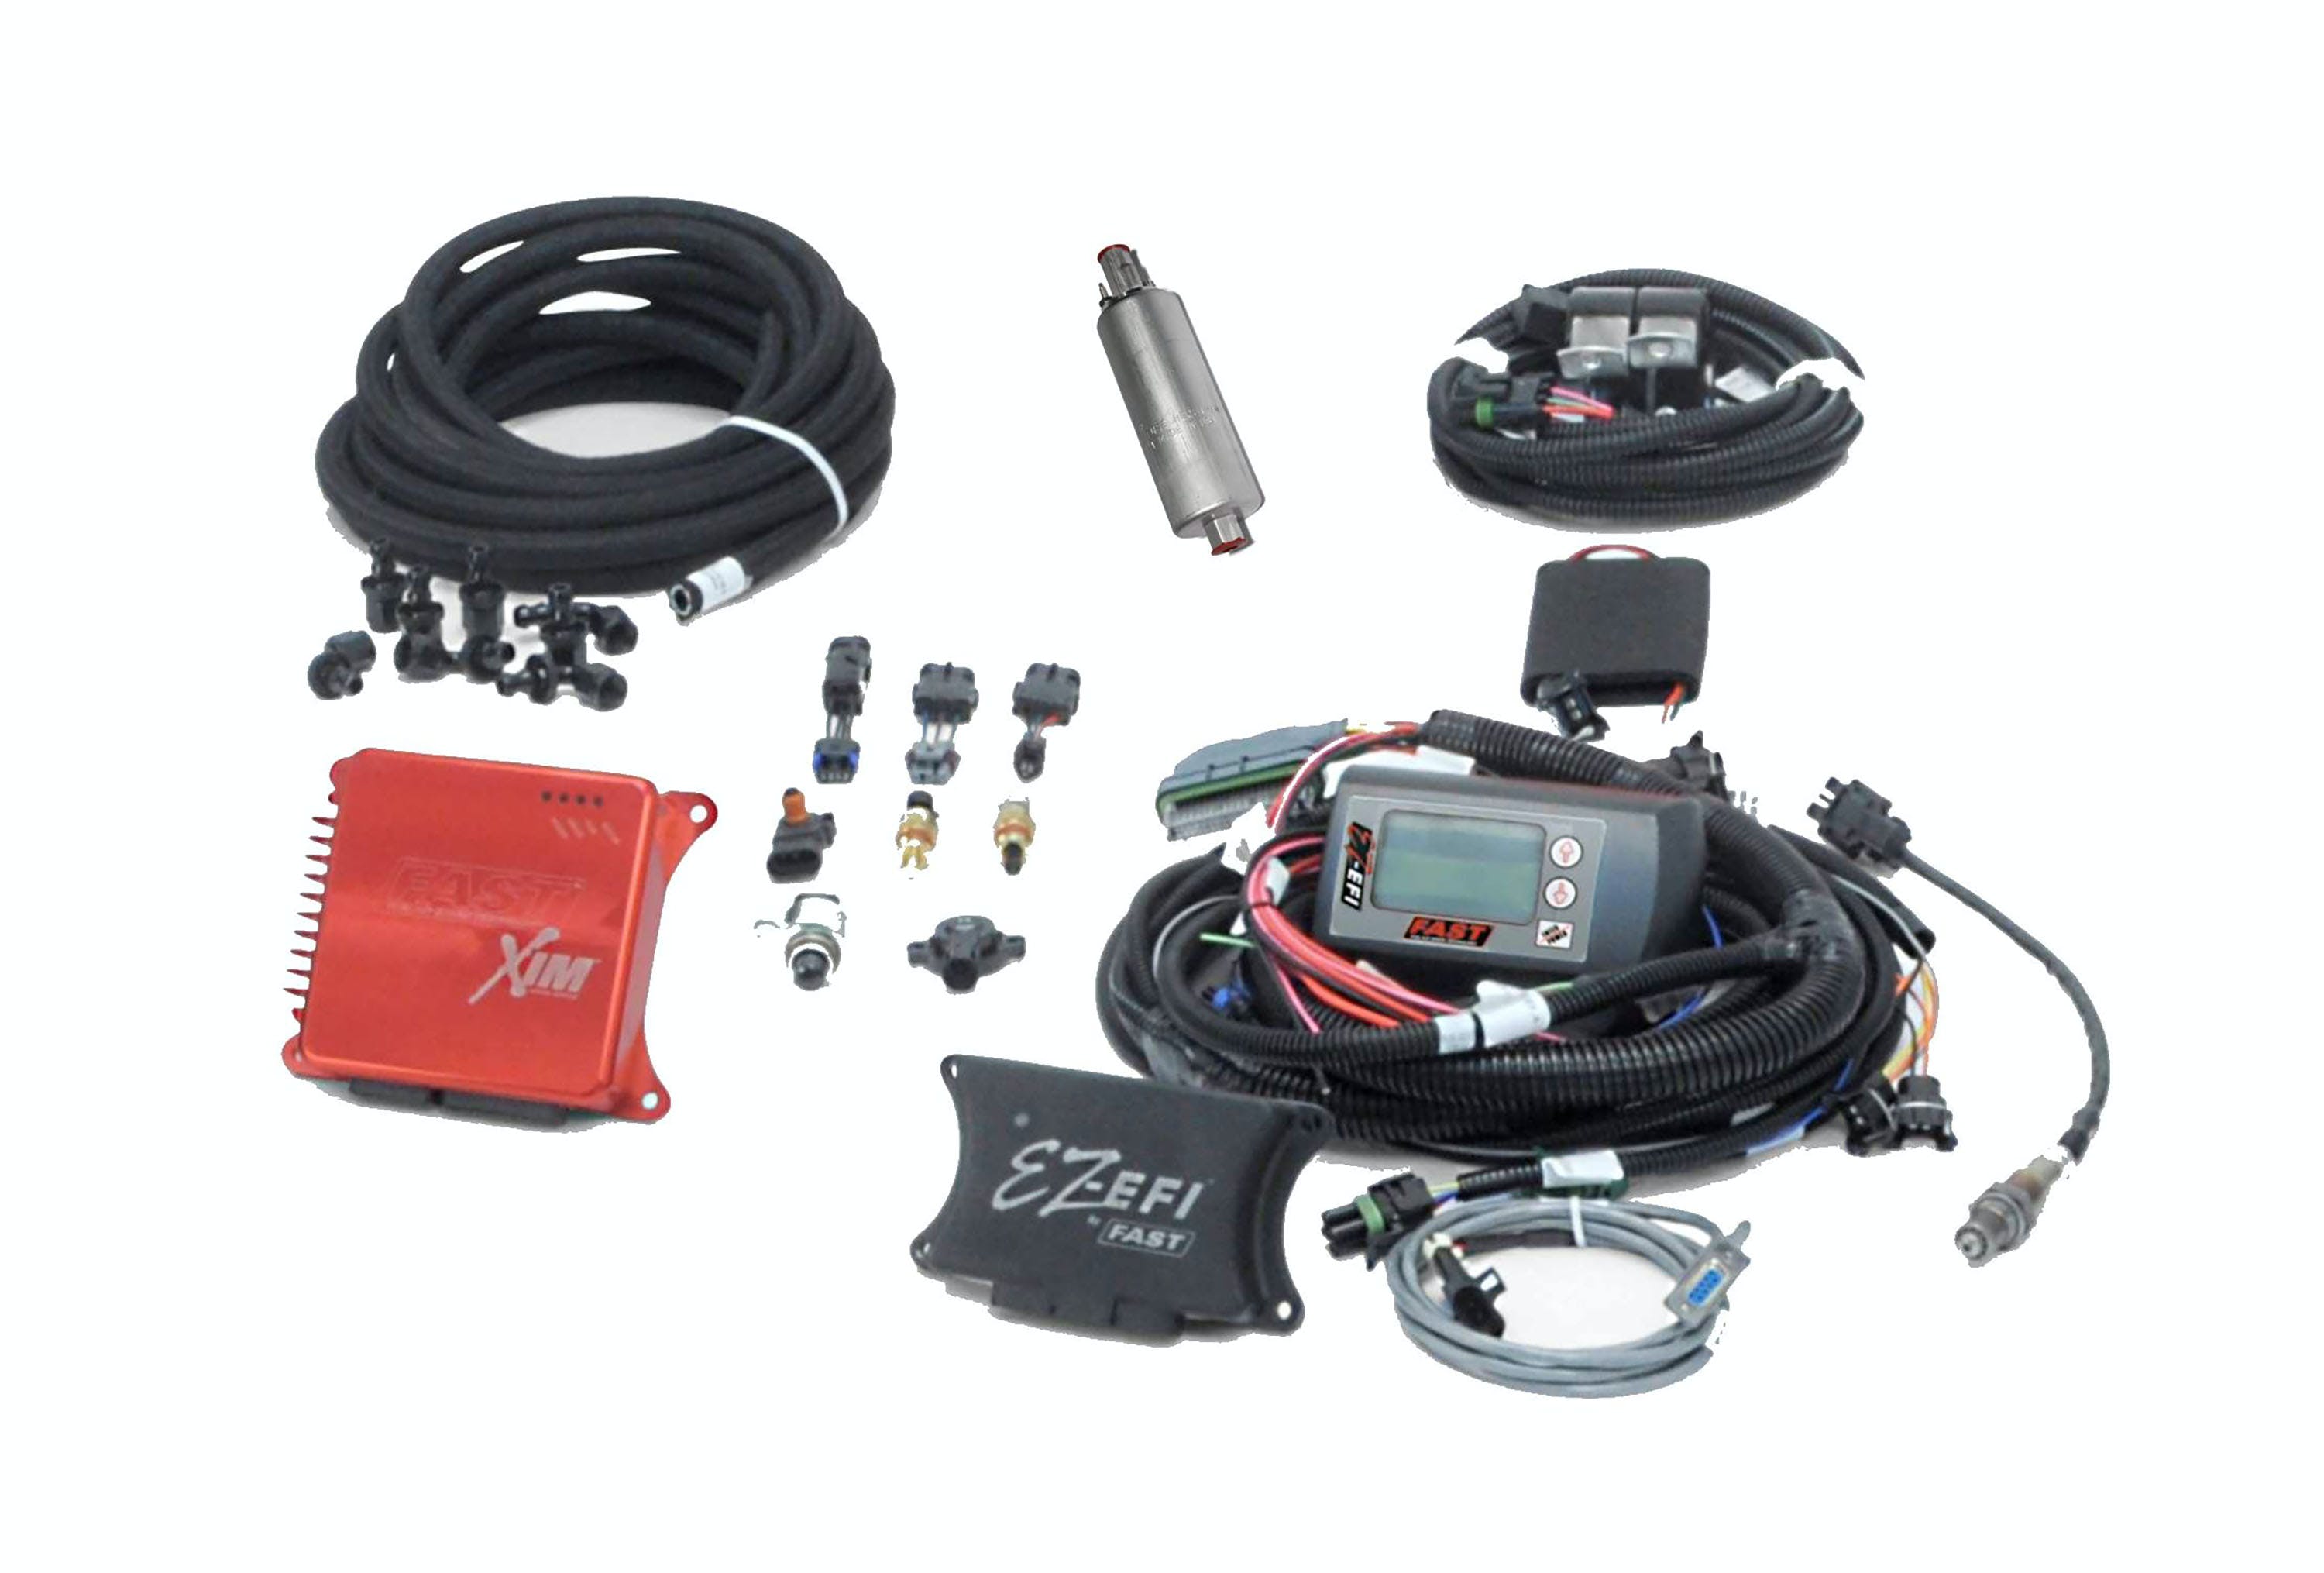 FAST - Fuel Air Spark Technology 302002T LS EZ EFI with XIM Ignition Controller and In-Tank Fuel Pump